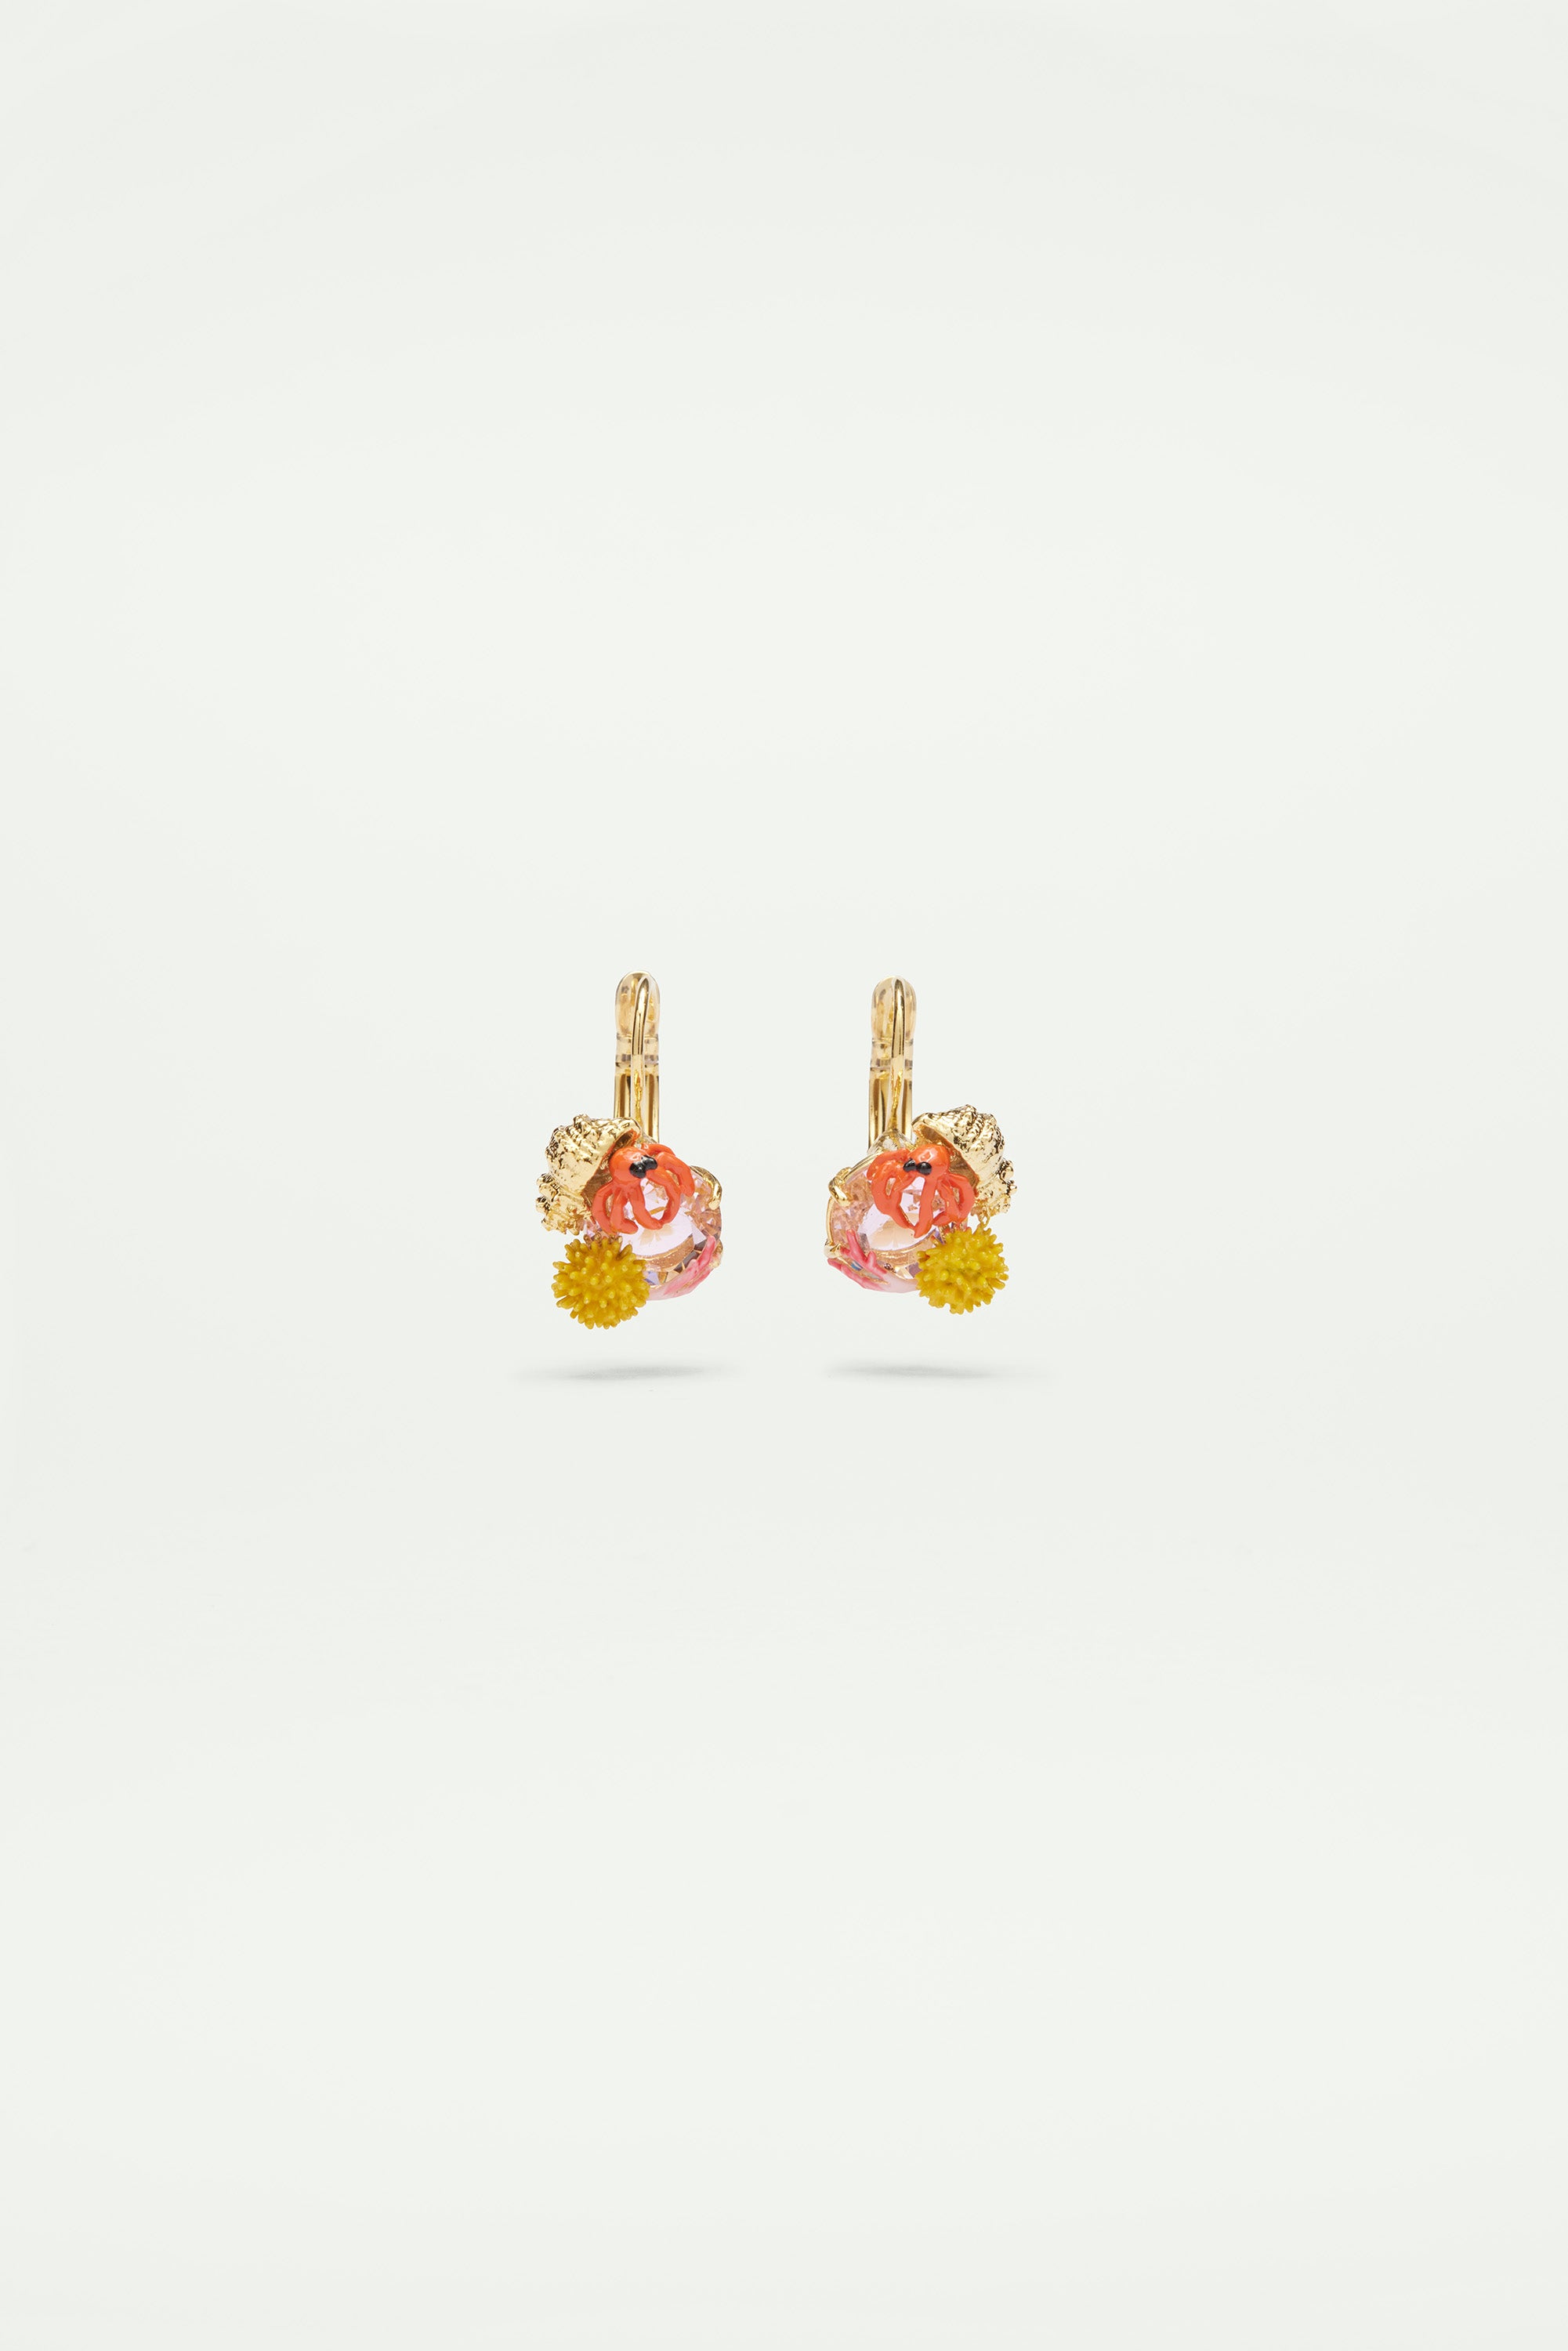 Hermit crab and light pink cut glass stone sleeper earrings